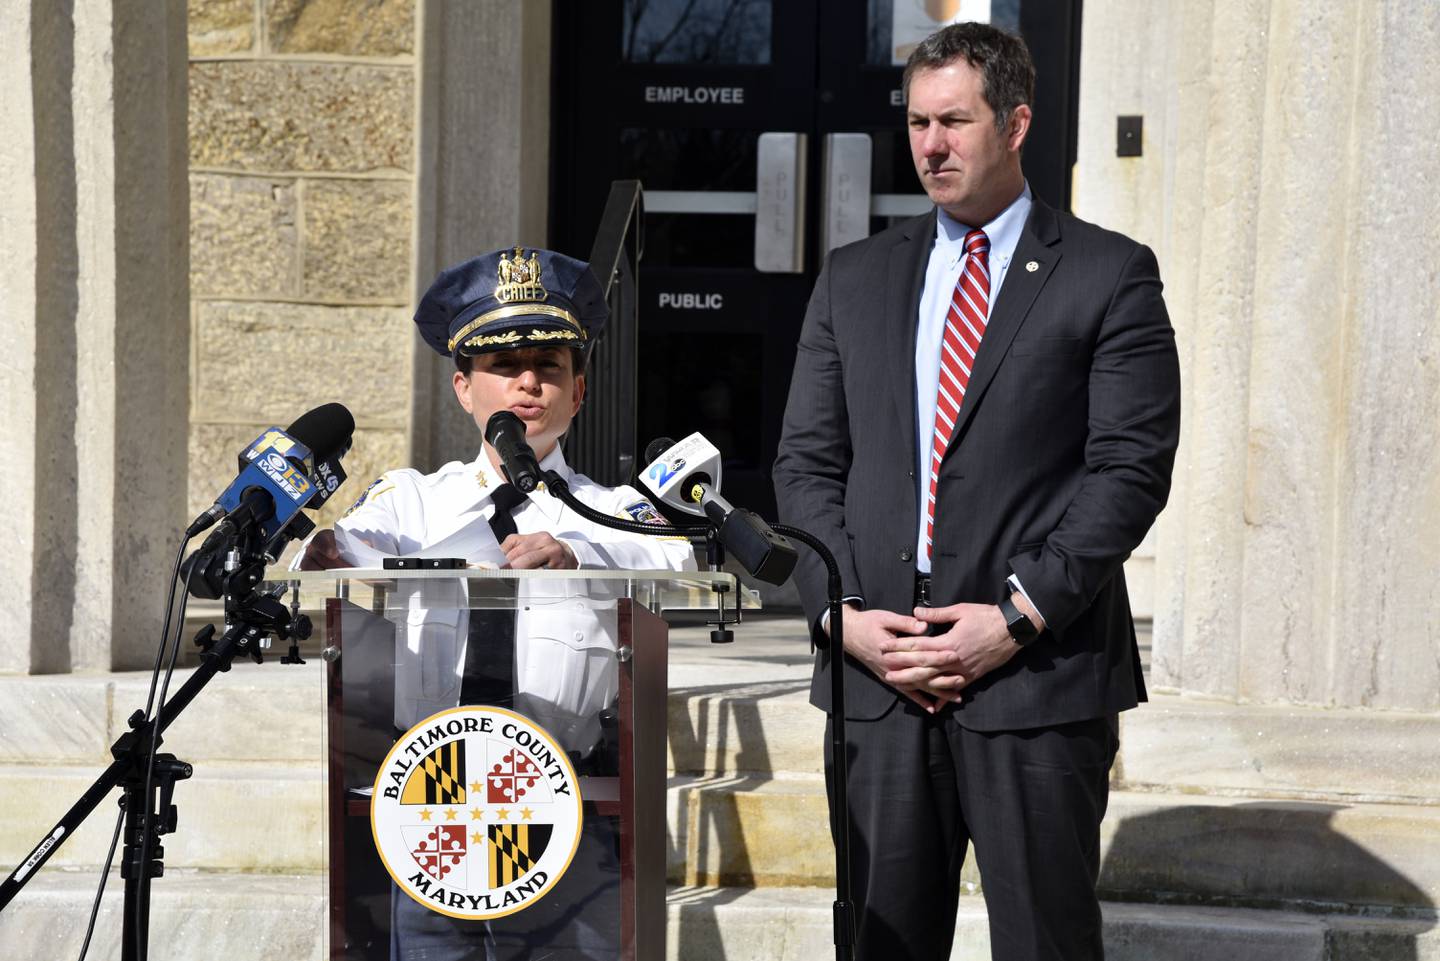 Baltimore County Police Chief Melissa Hyatt and Baltimore County Executive Johnny Olszewski Jr. speak outside the Historic Courthouse in Towson April 4, 2022.